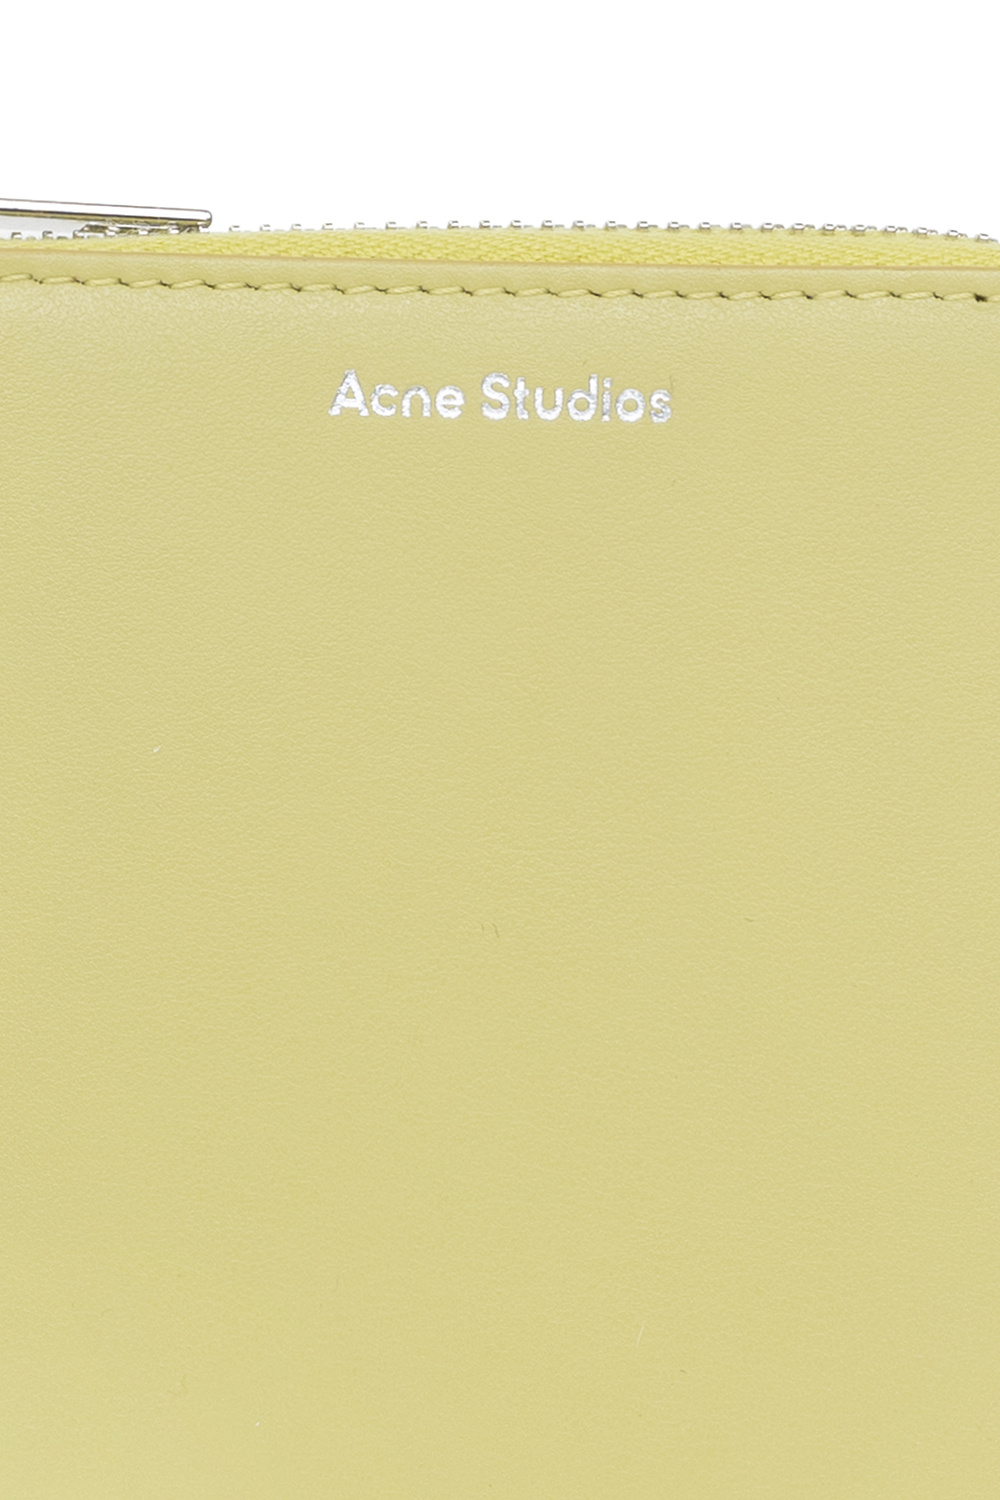 Acne Studios Check out the most fashionable models